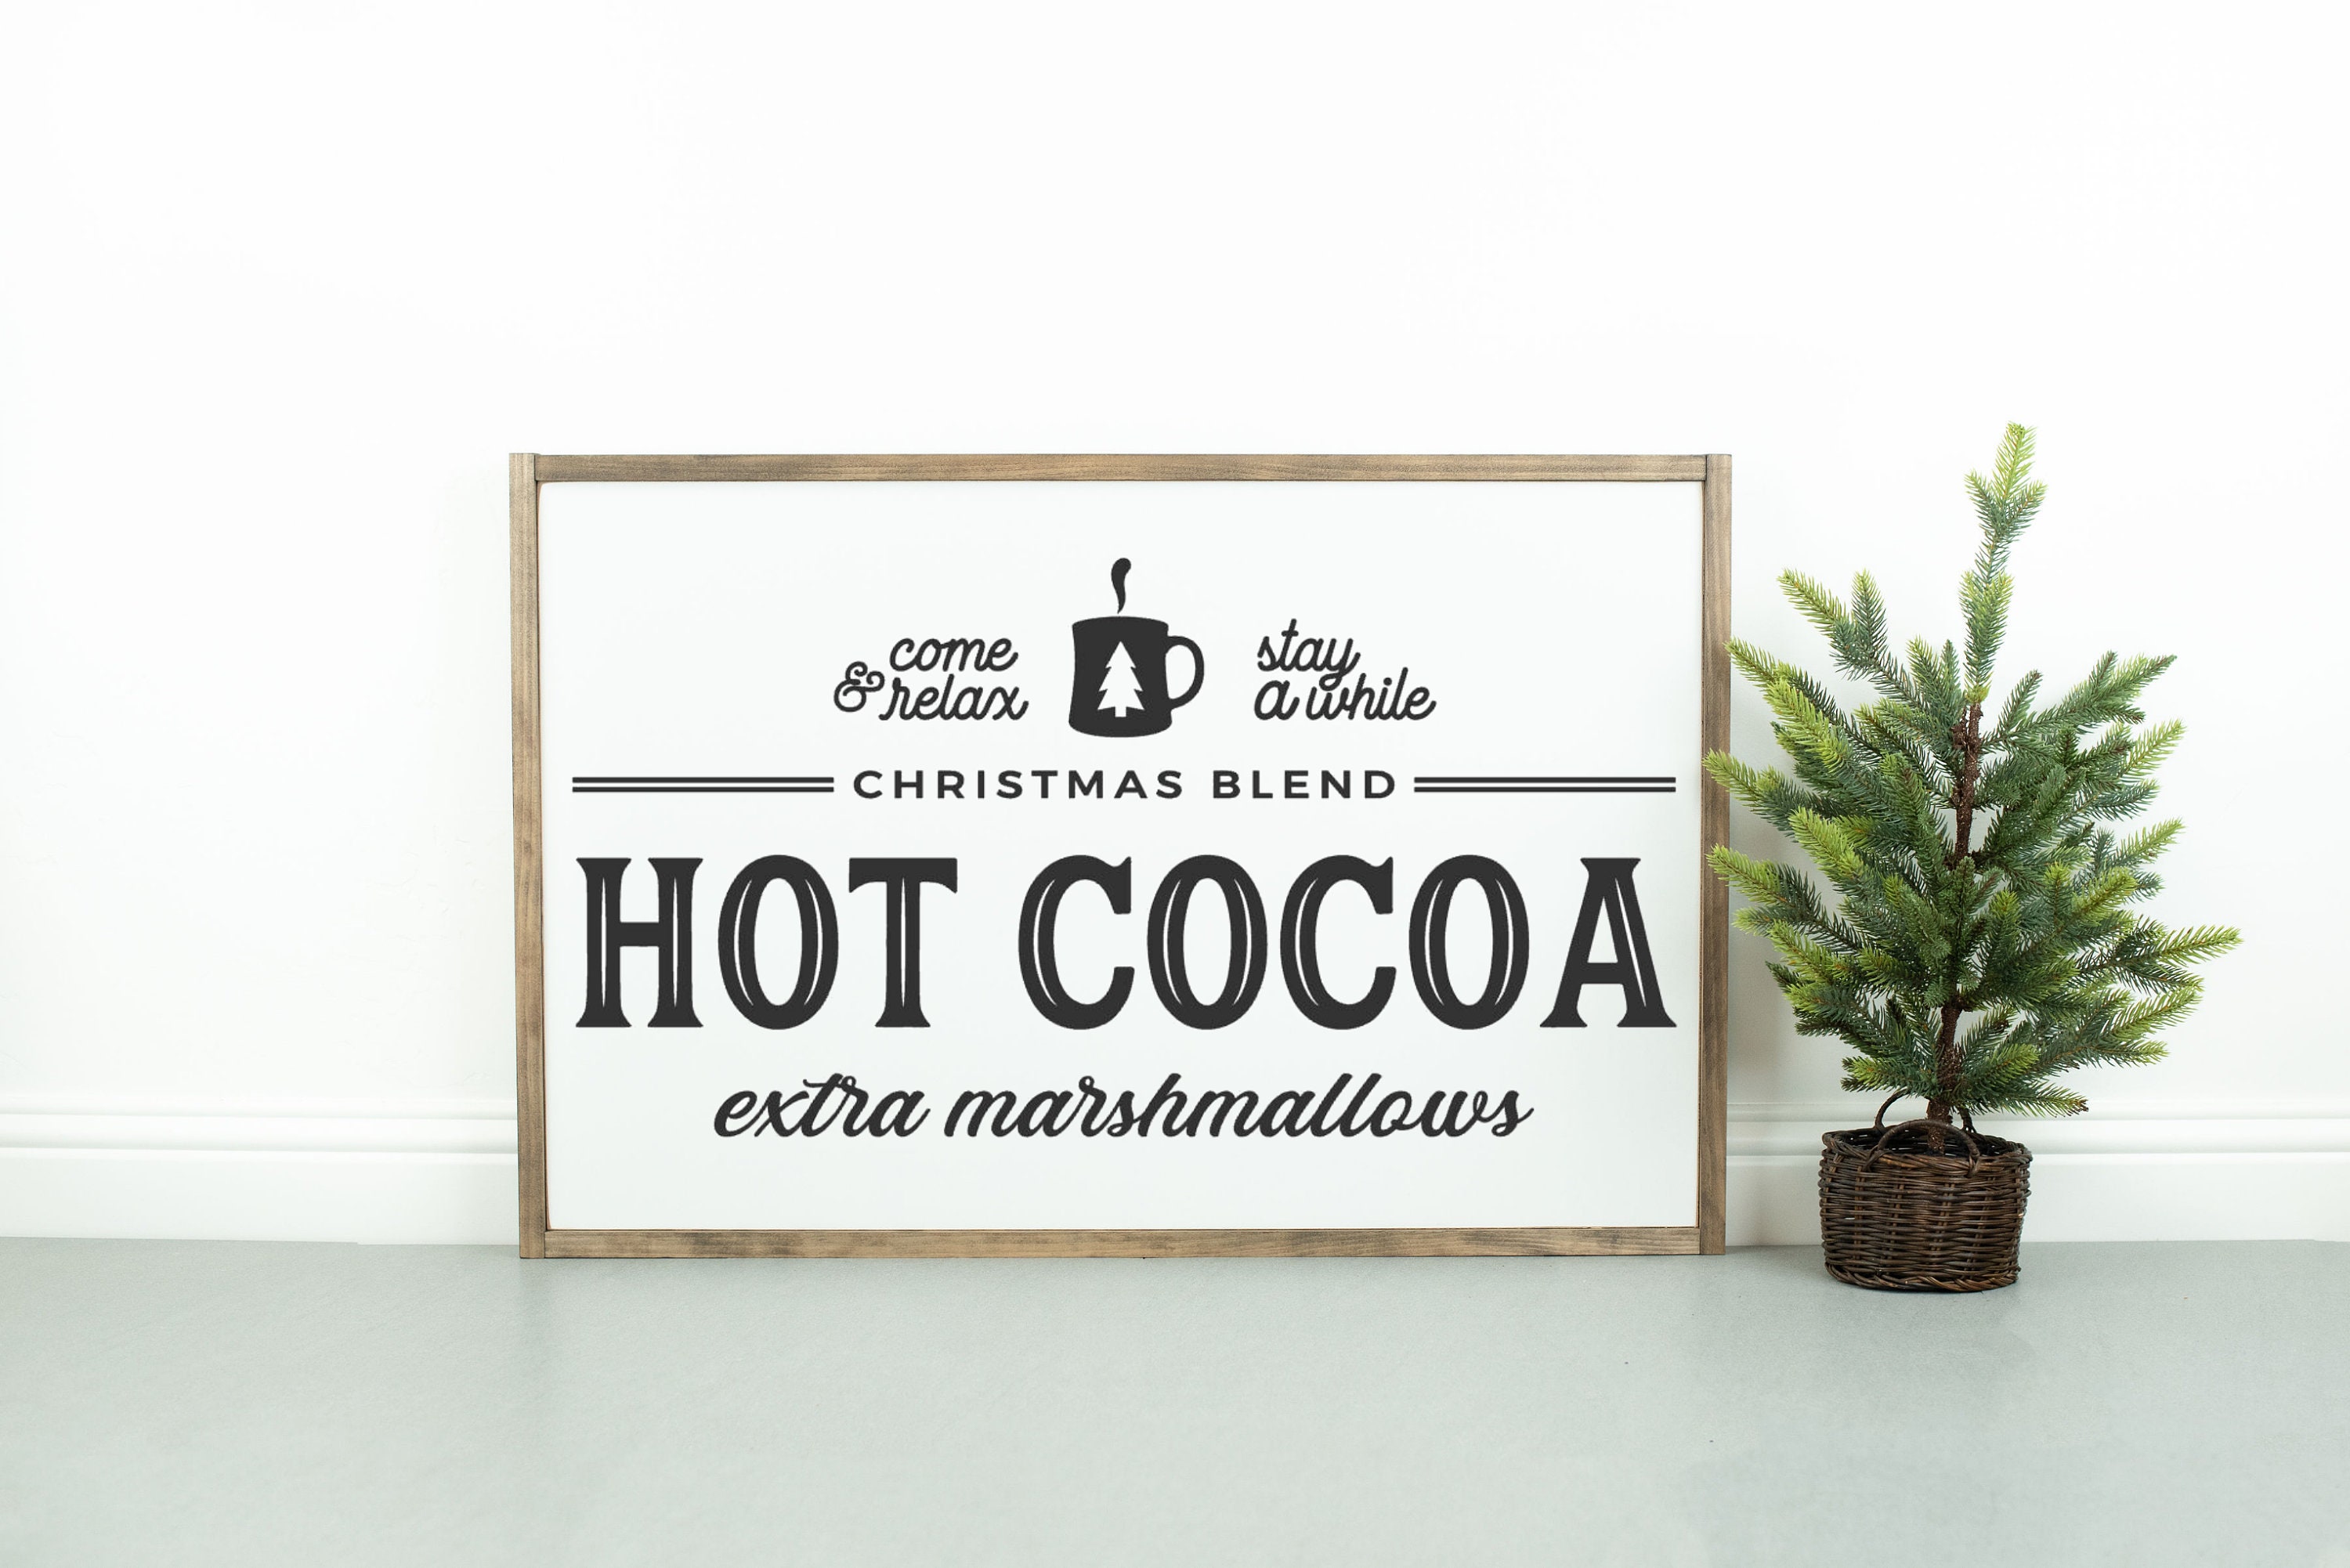 Hot Cocoa Christmas Blend Sign | 18x24 Modern Farmhouse Wood Signs Holiday Decor Vintage Free Shipping"